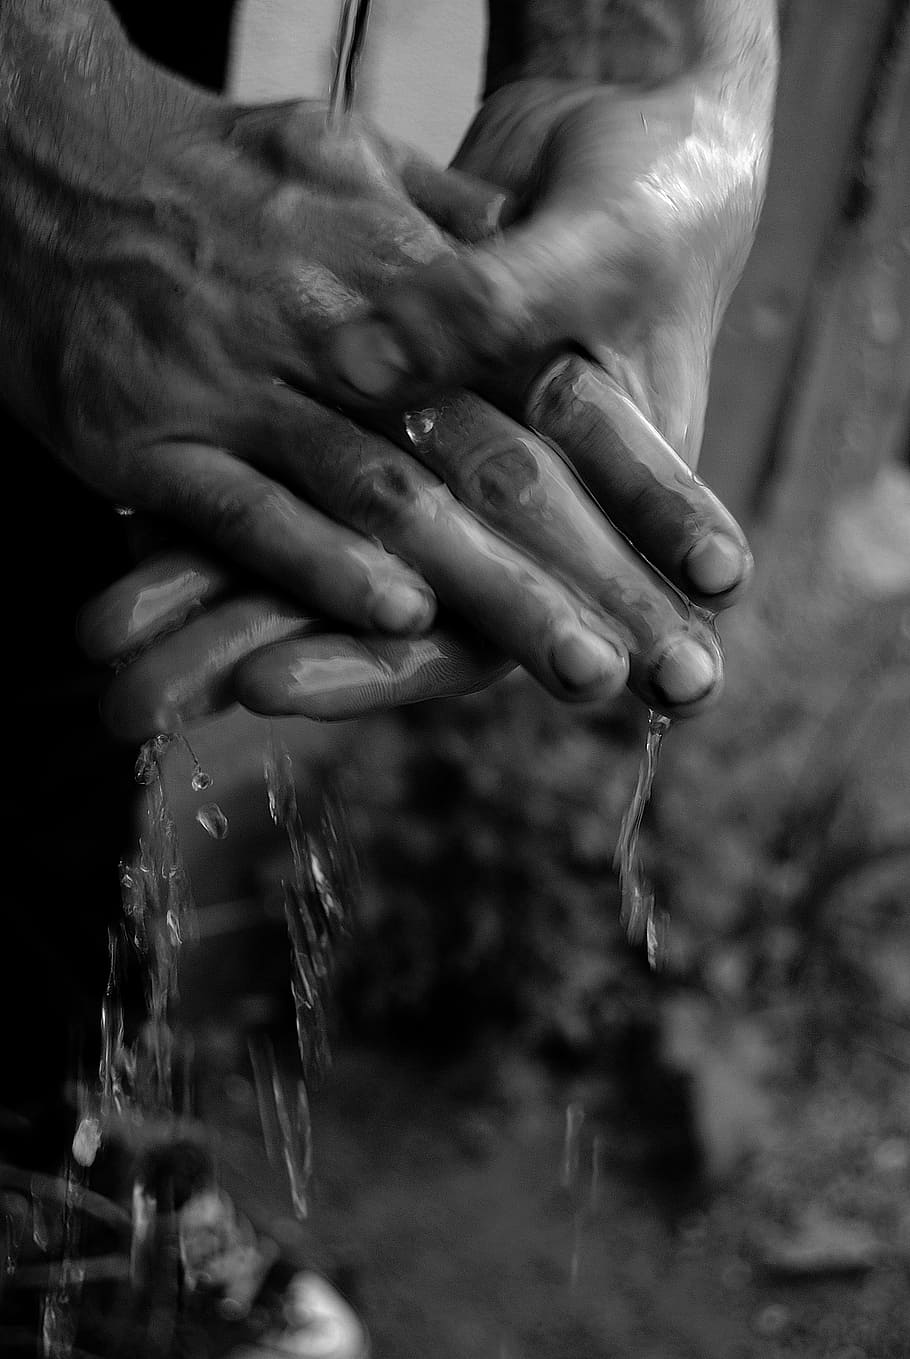 Hands, Poor, Black And White, Homeless, poverty, human hand, HD wallpaper